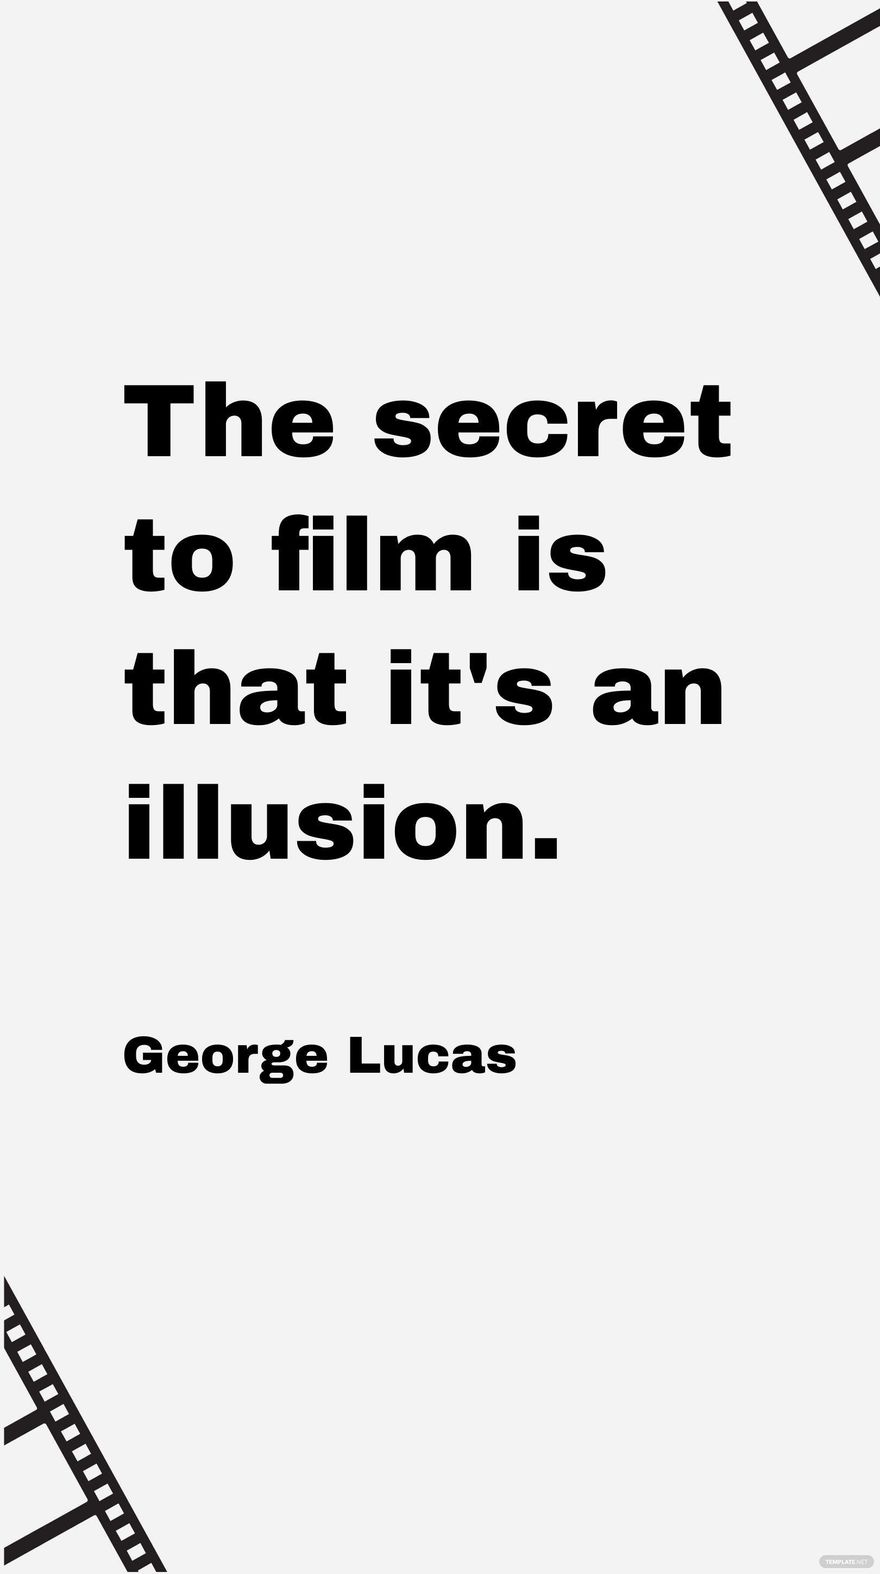 George Lucas - The secret to film is that it's an illusion.